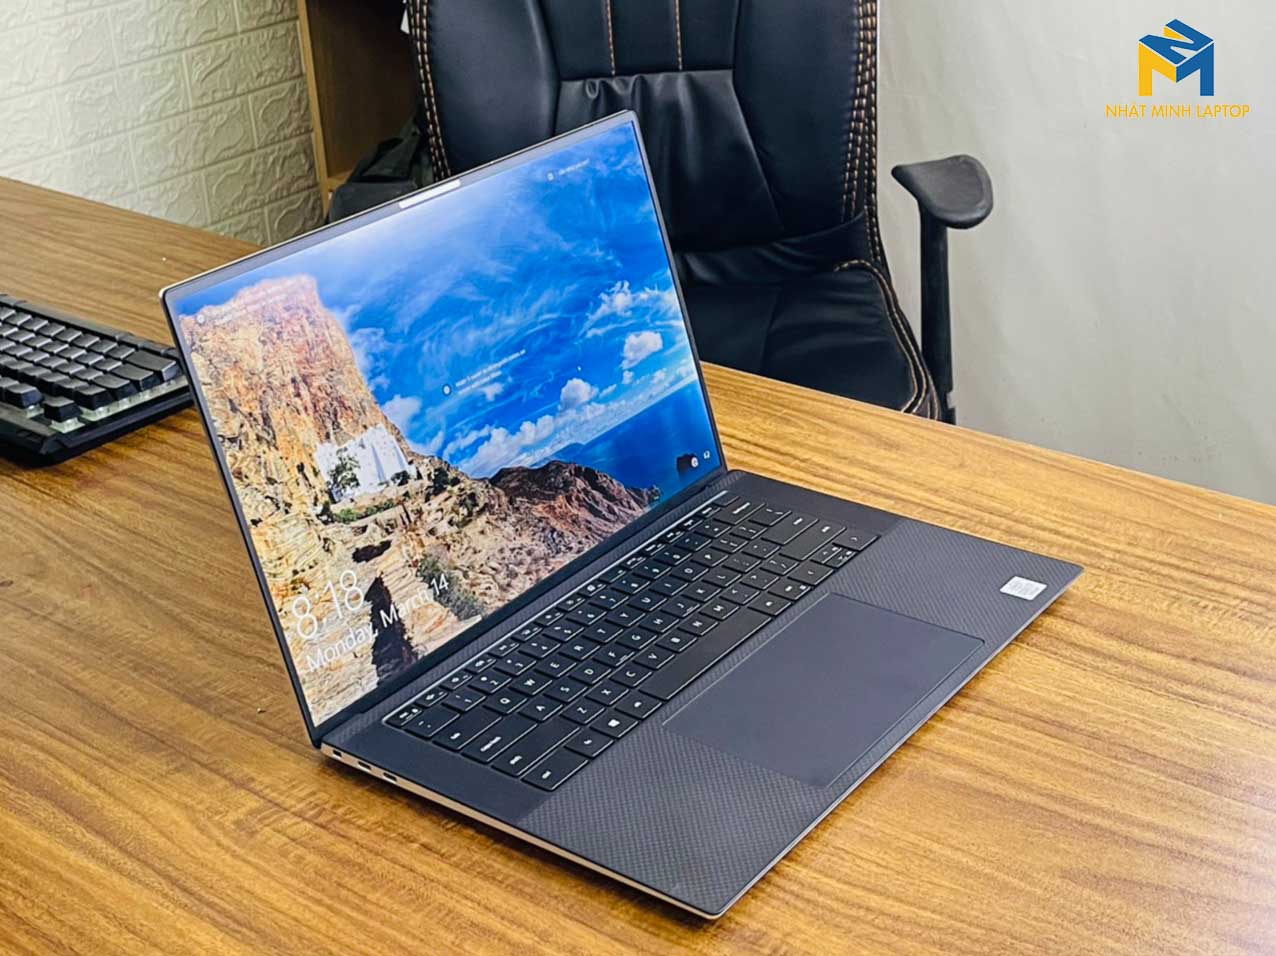 dell xps 9500